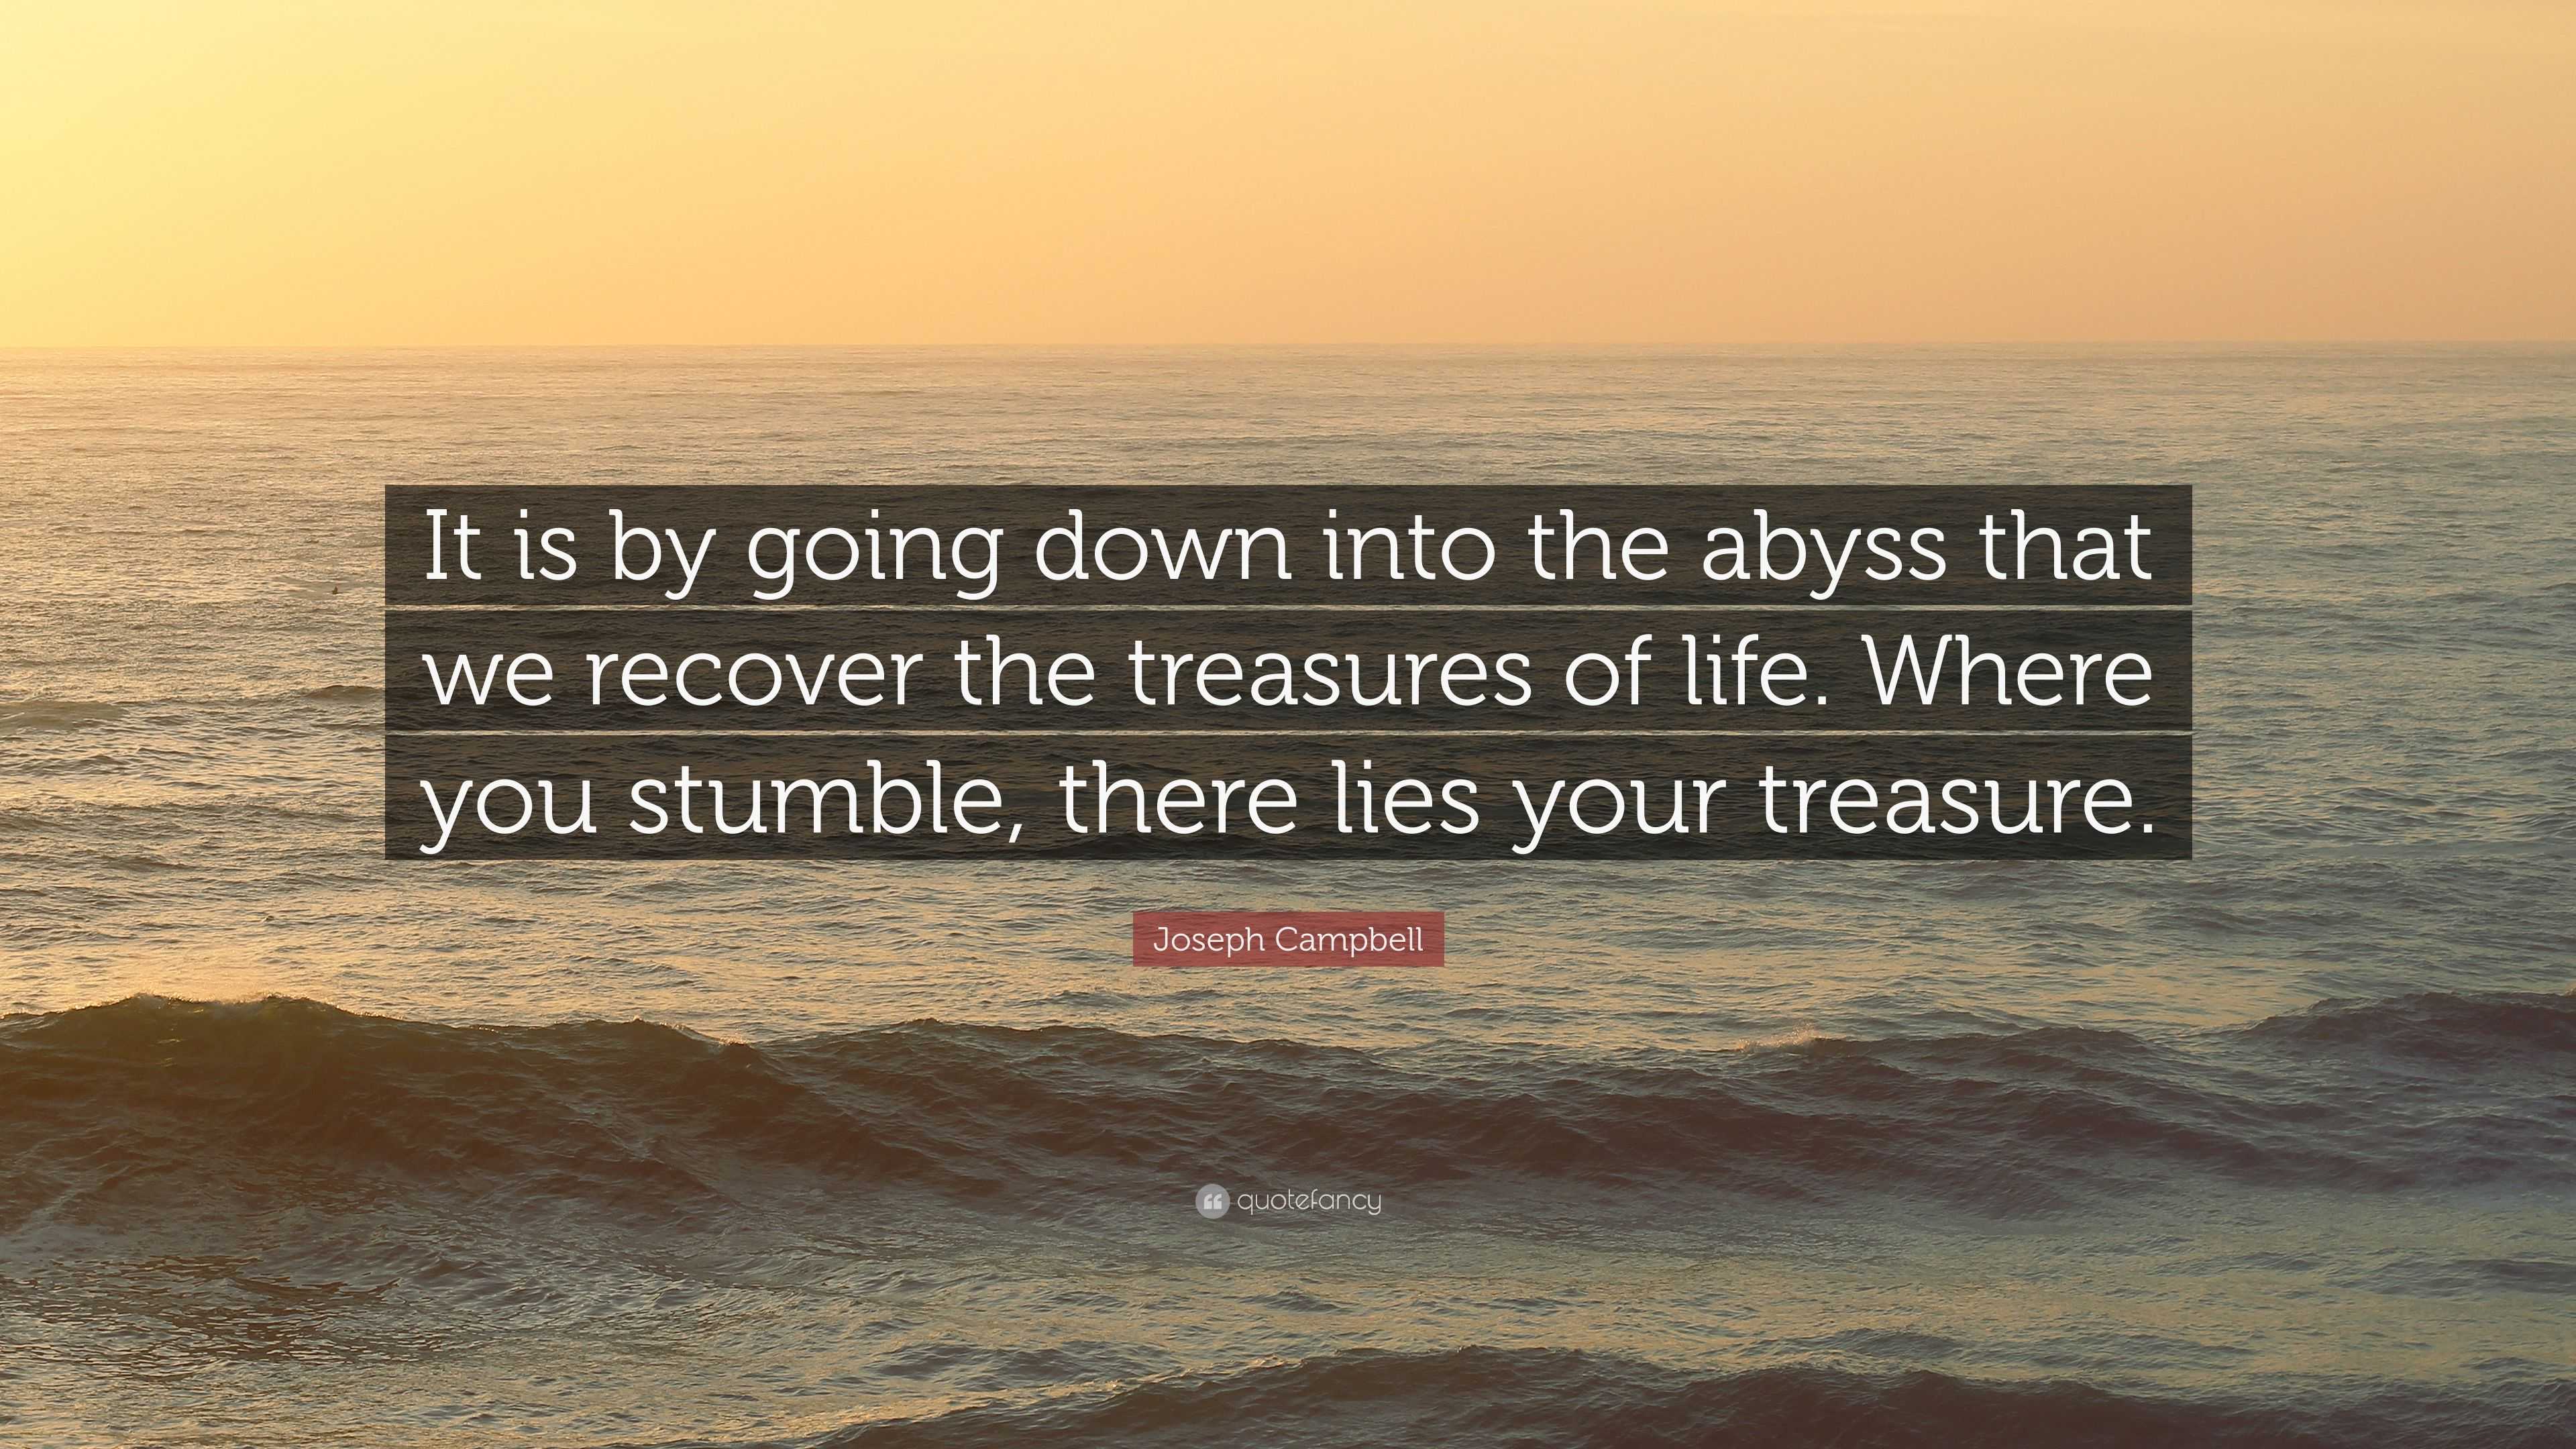 Joseph Campbell Quote: “It is by going down into the abyss that we ...